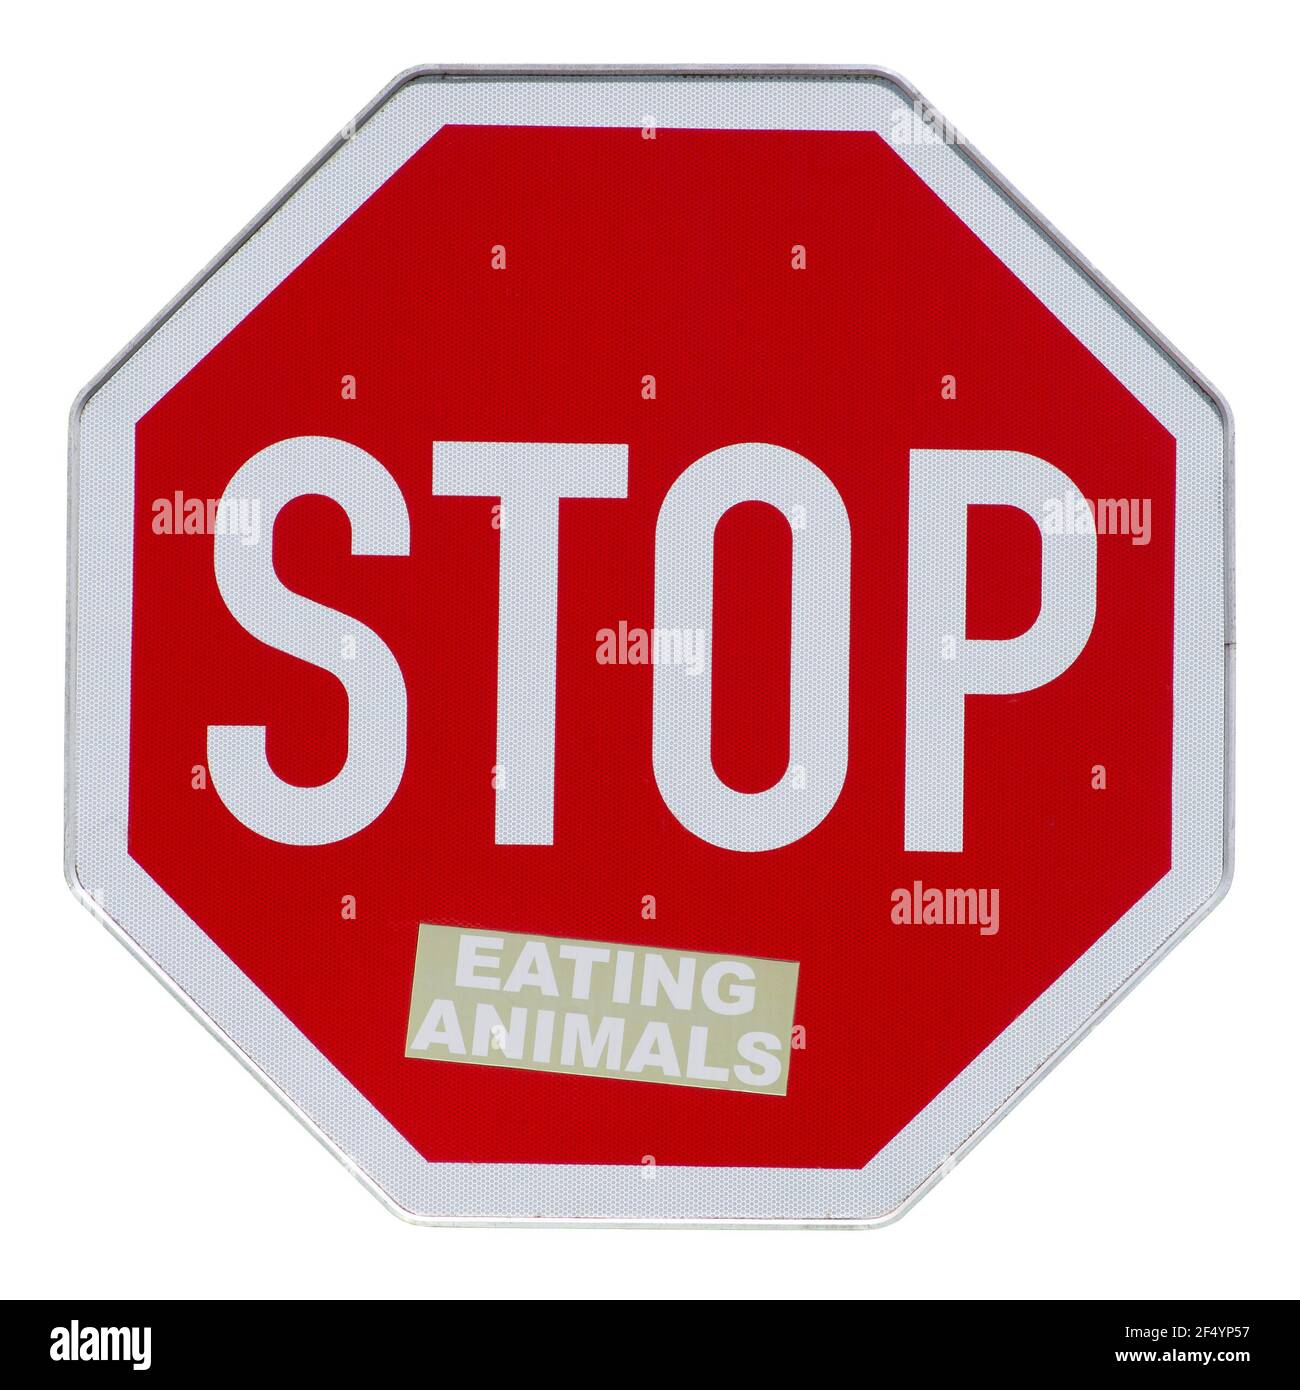 Stop sign with sticker „eating animals“, symbolic picture for sustainable agriculture, stopping industrial livestock farming, healthy lifestyle Stock Photo